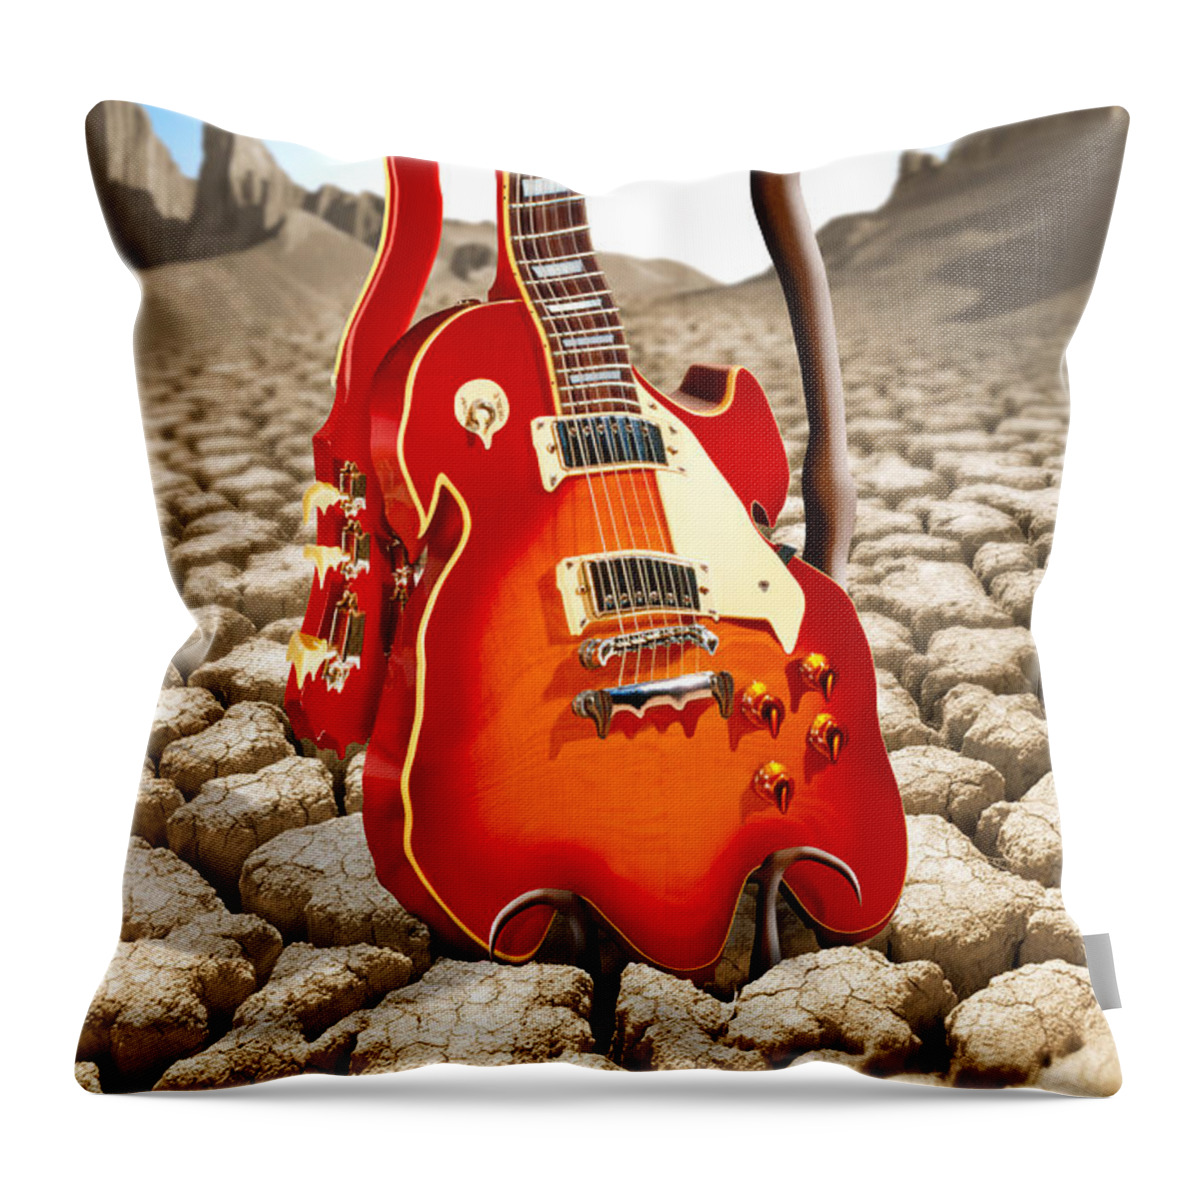 Rock And Roll Throw Pillow featuring the photograph Soft Guitar by Mike McGlothlen